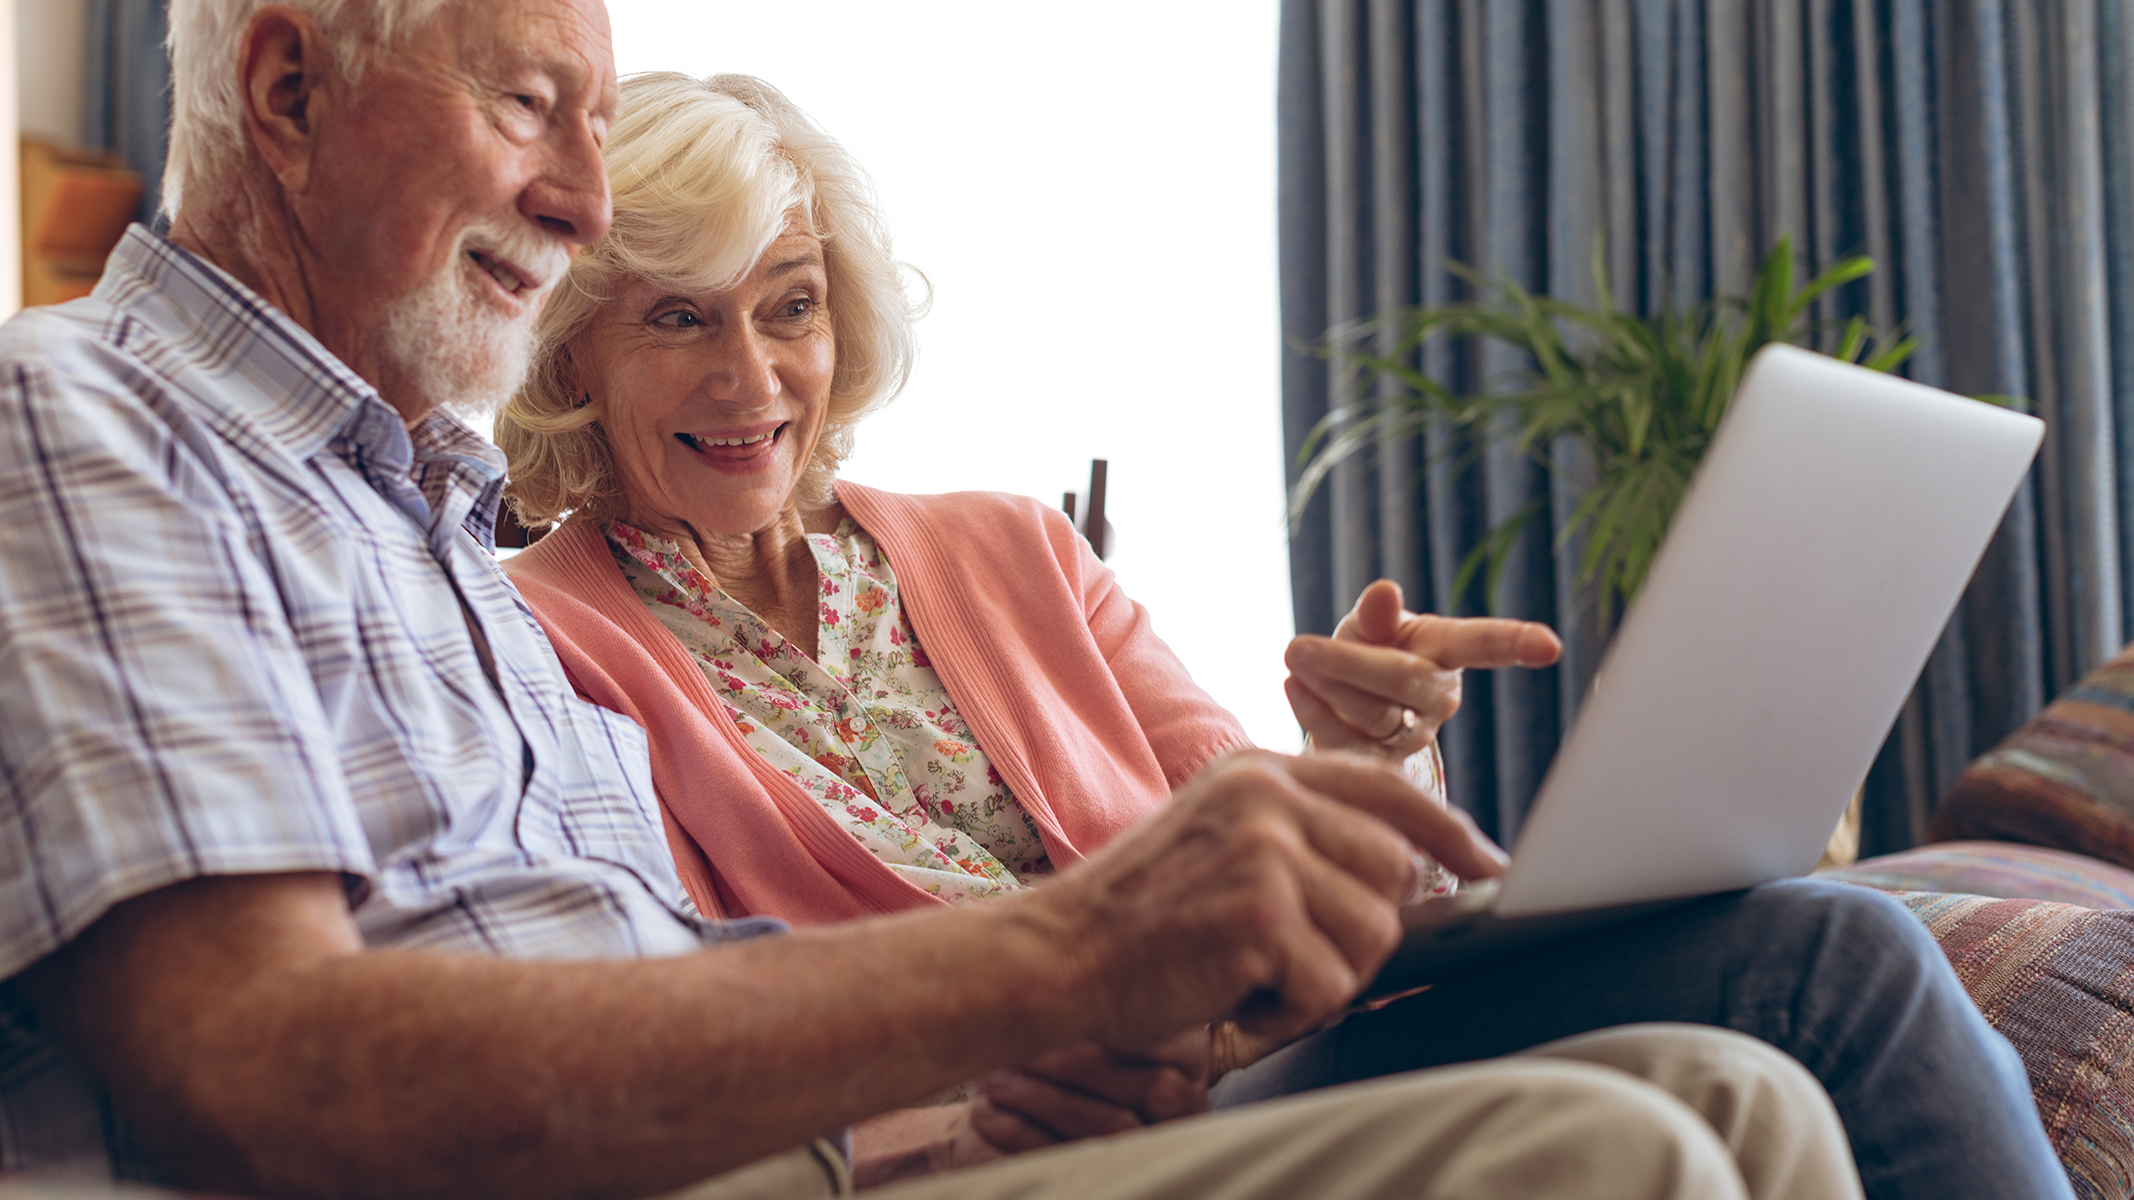 Senior couple on couch pointing at laptop screen.